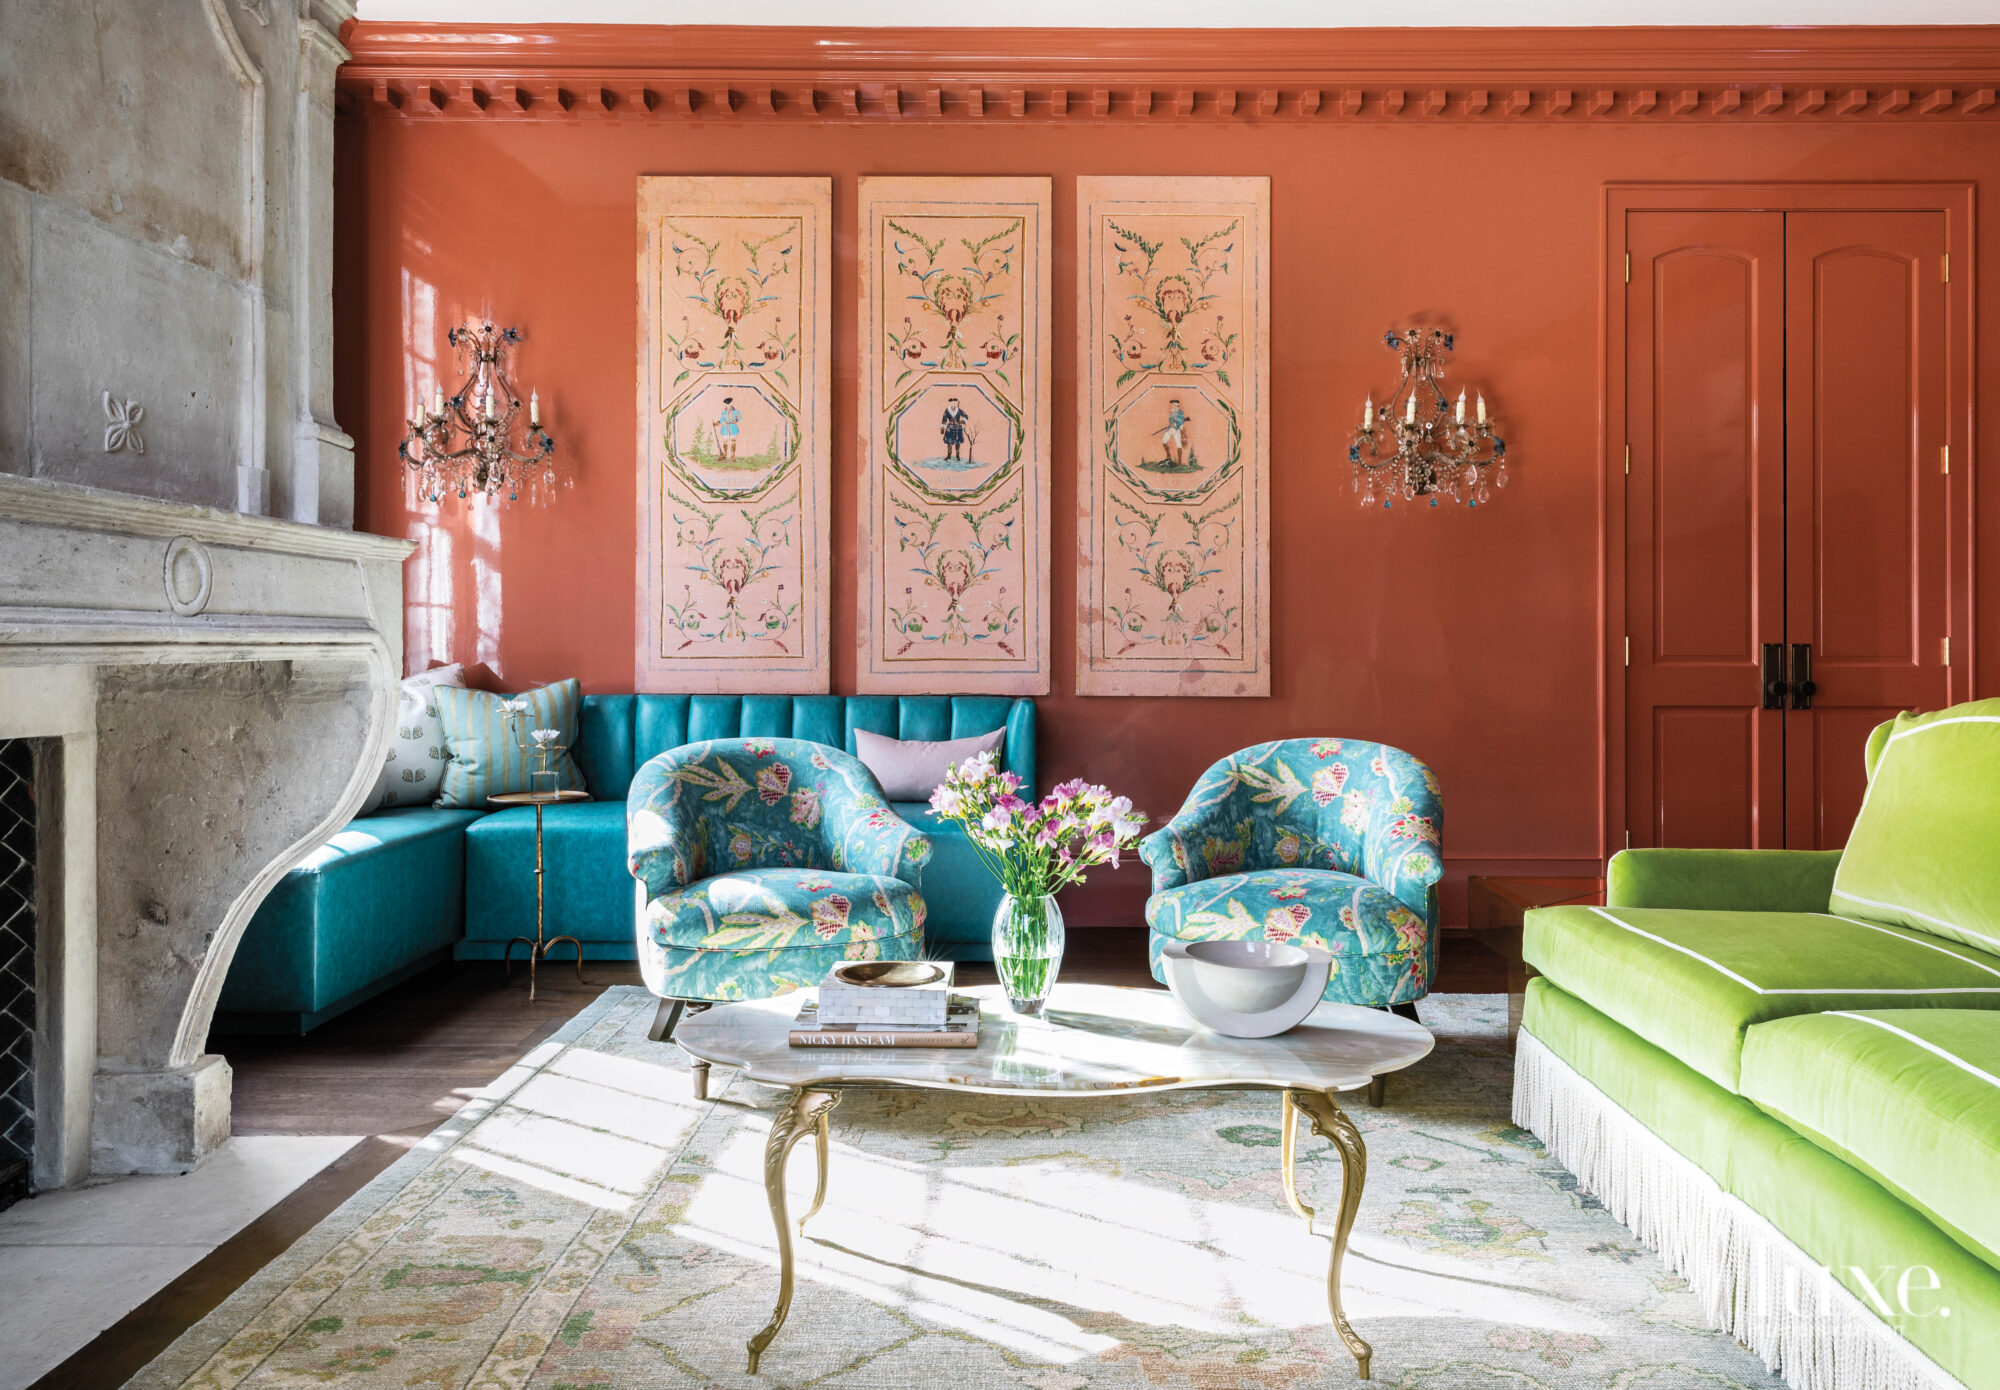 Living room with bright terra cotta walls and furnishings and statement art